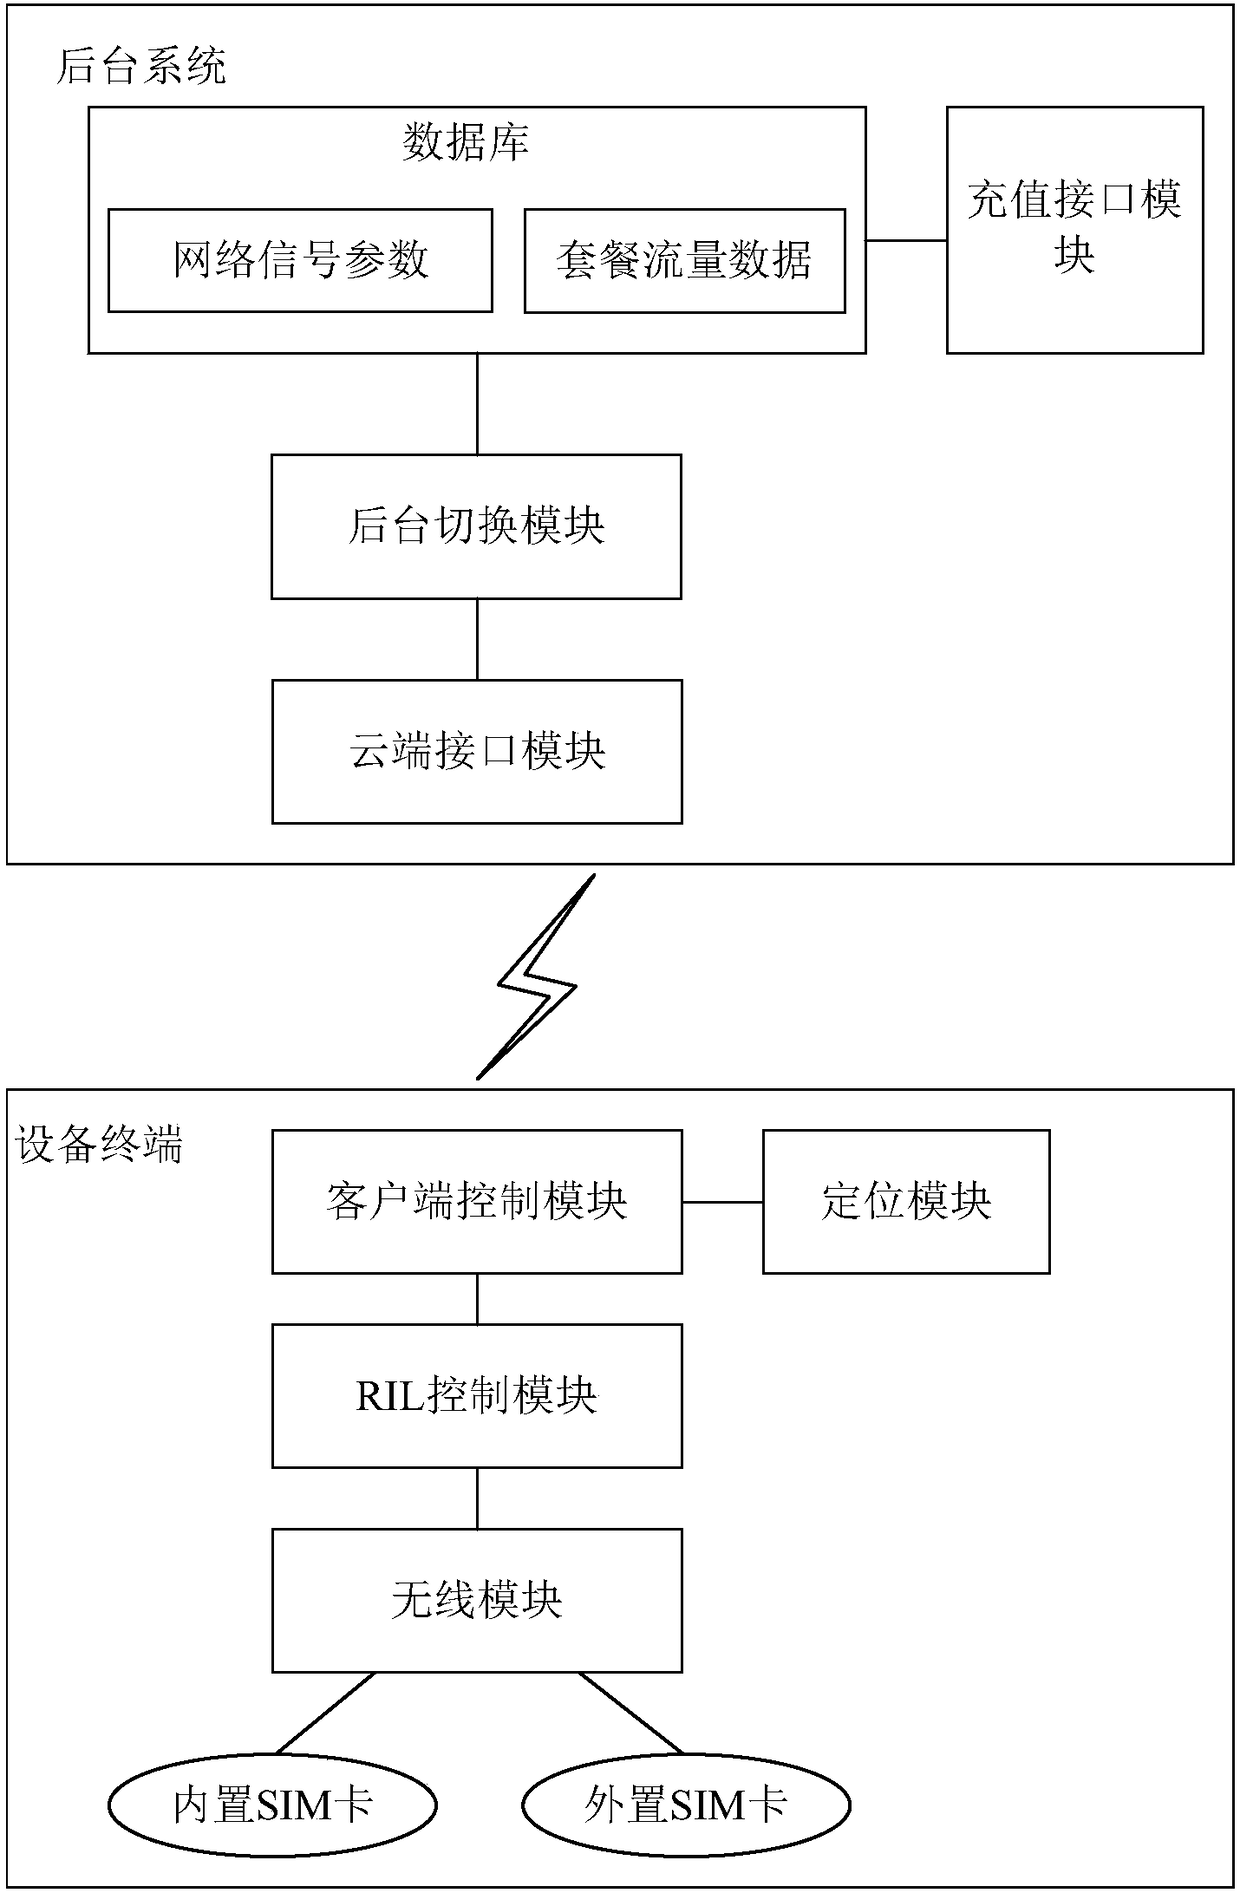 Multi-SIM card multi-operator network fusion system, and SIM card switching and recharge billing method